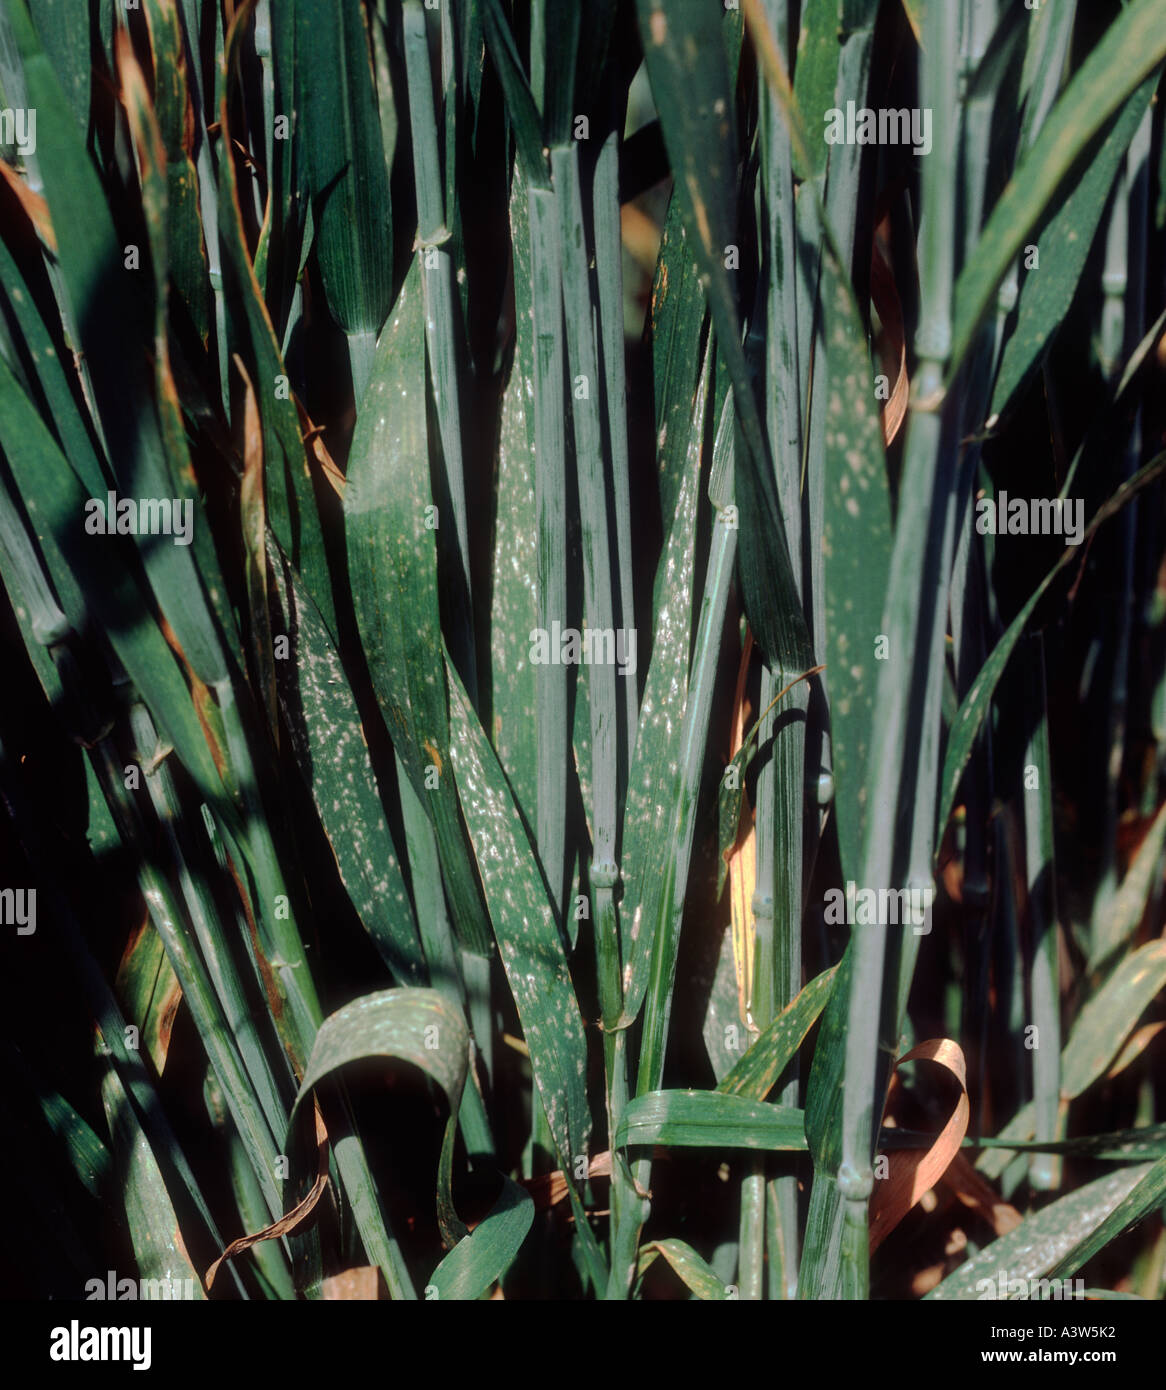 Powdery mildew (Erysiphe graminis f.sp. tritici) infection on wheat leaves Stock Photo